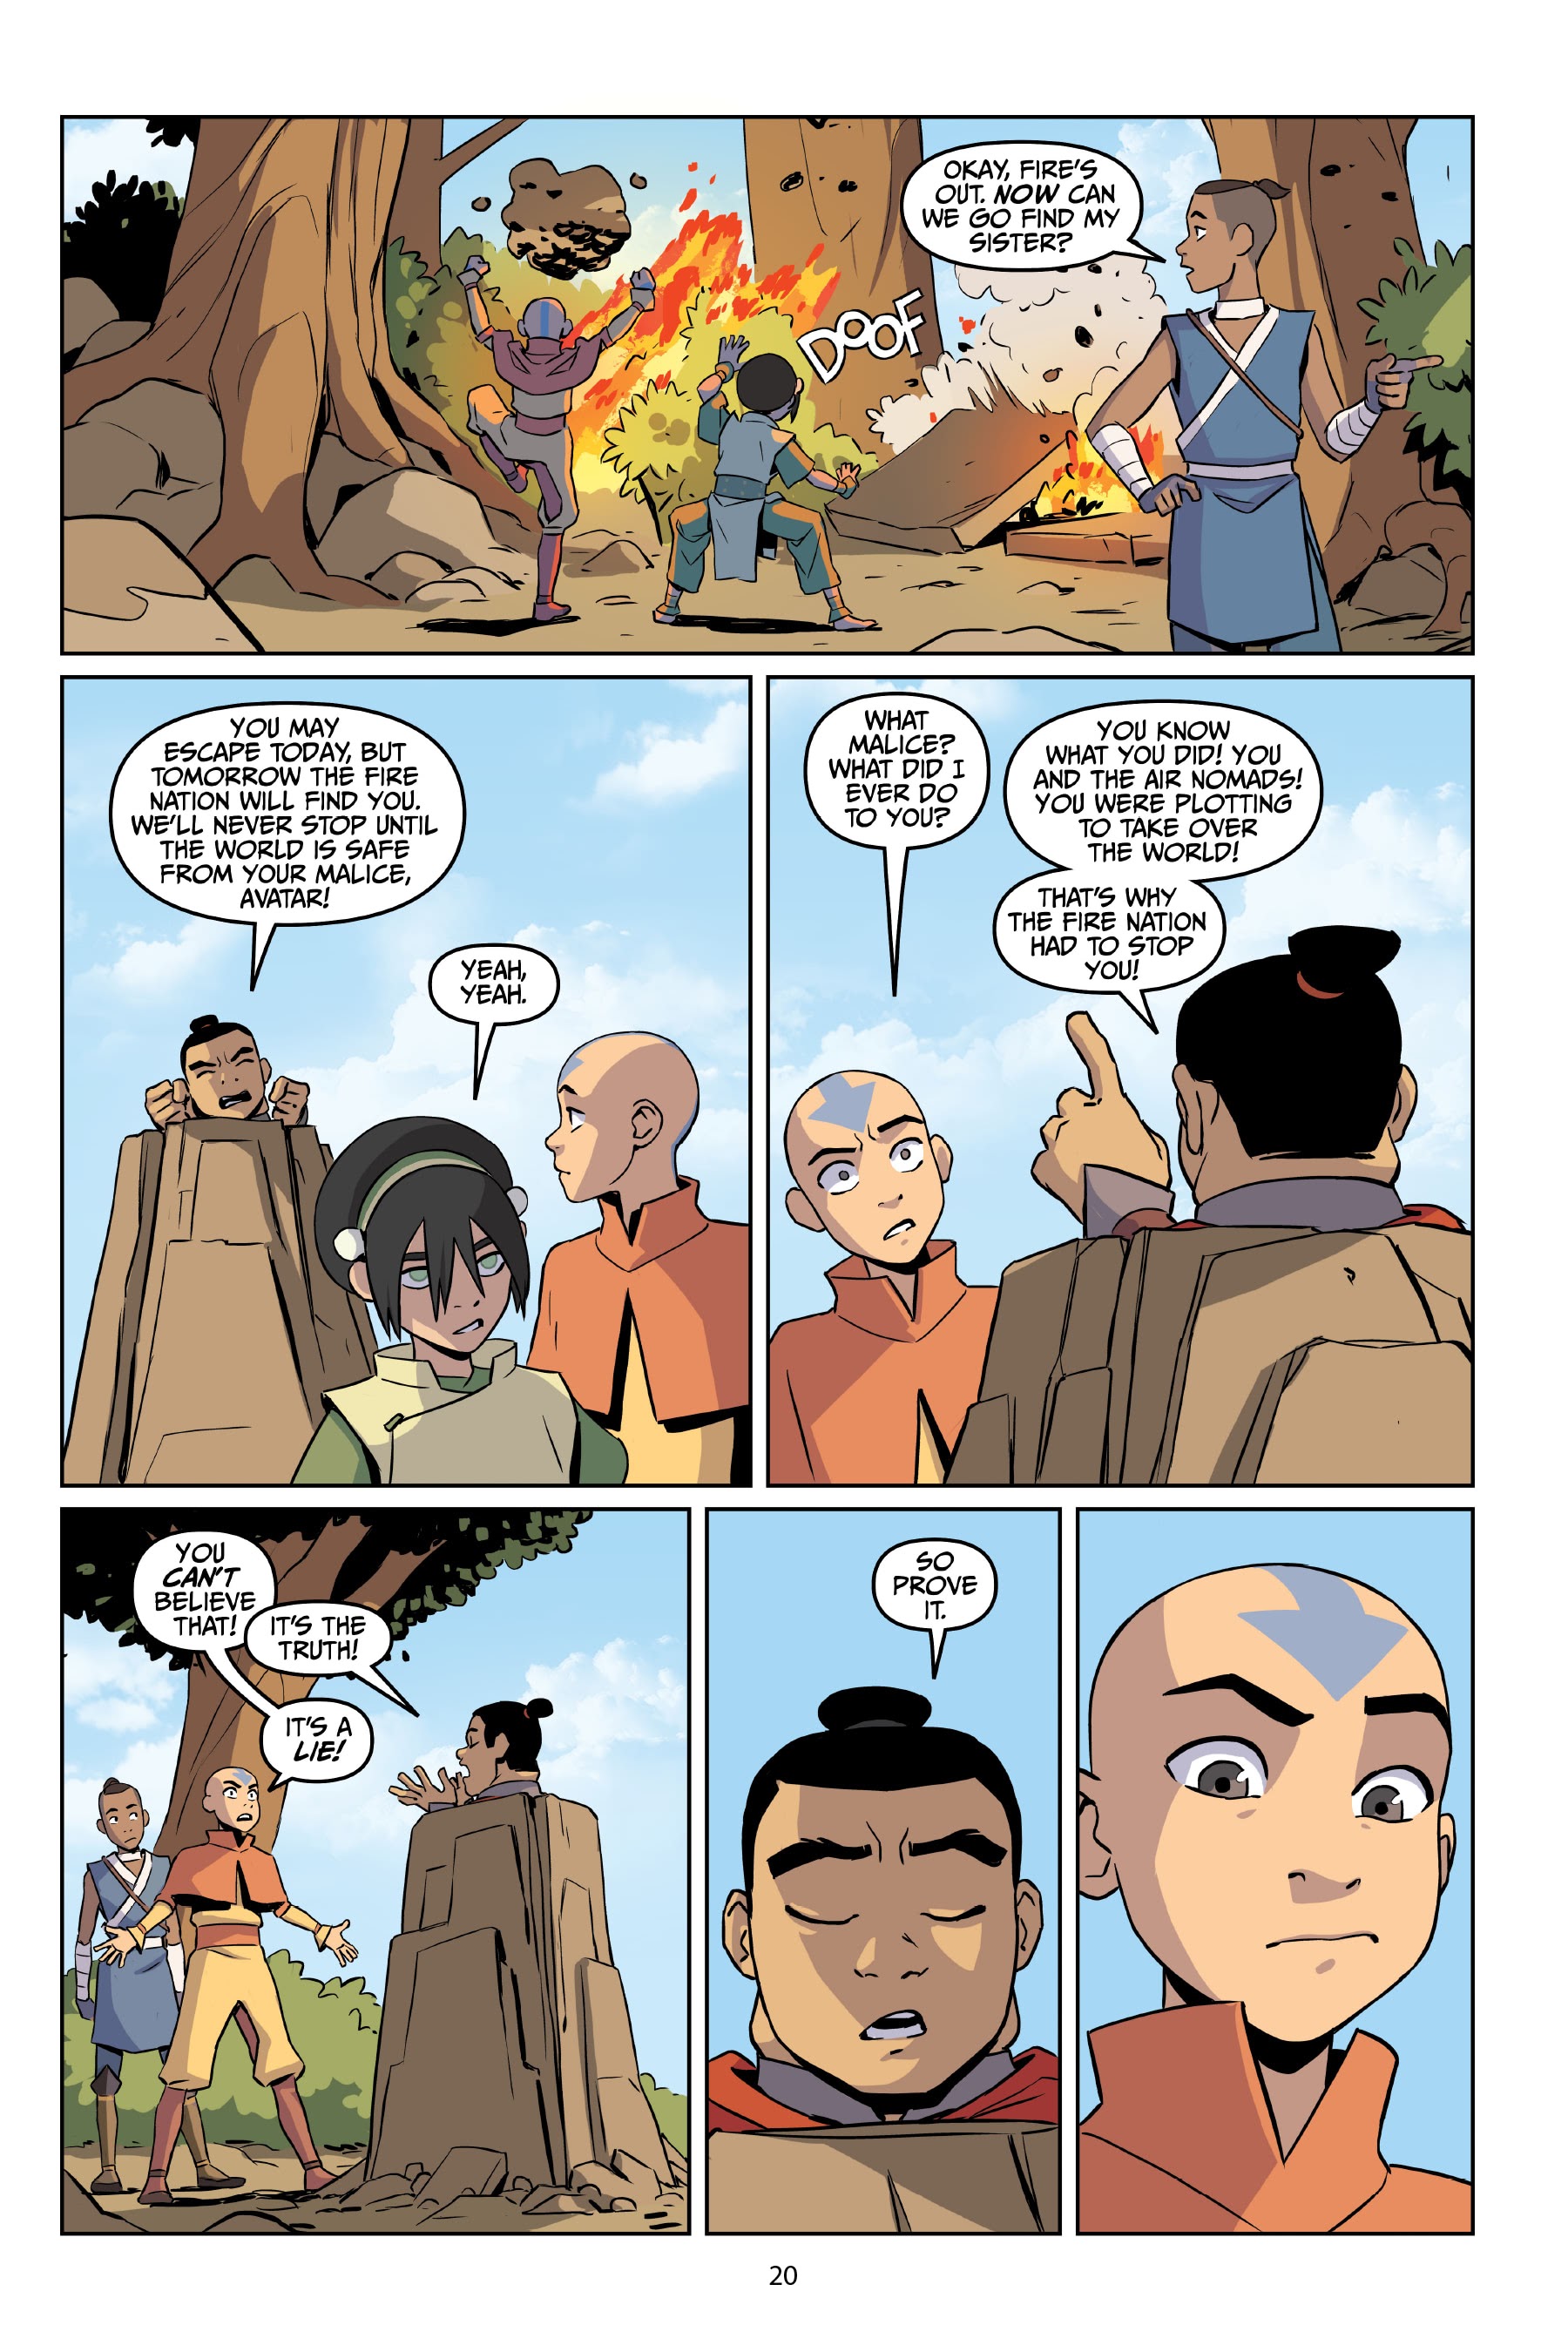 Read online Avatar: The Last Airbender—Katara and the Pirate's Silver comic -  Issue # TPB - 21